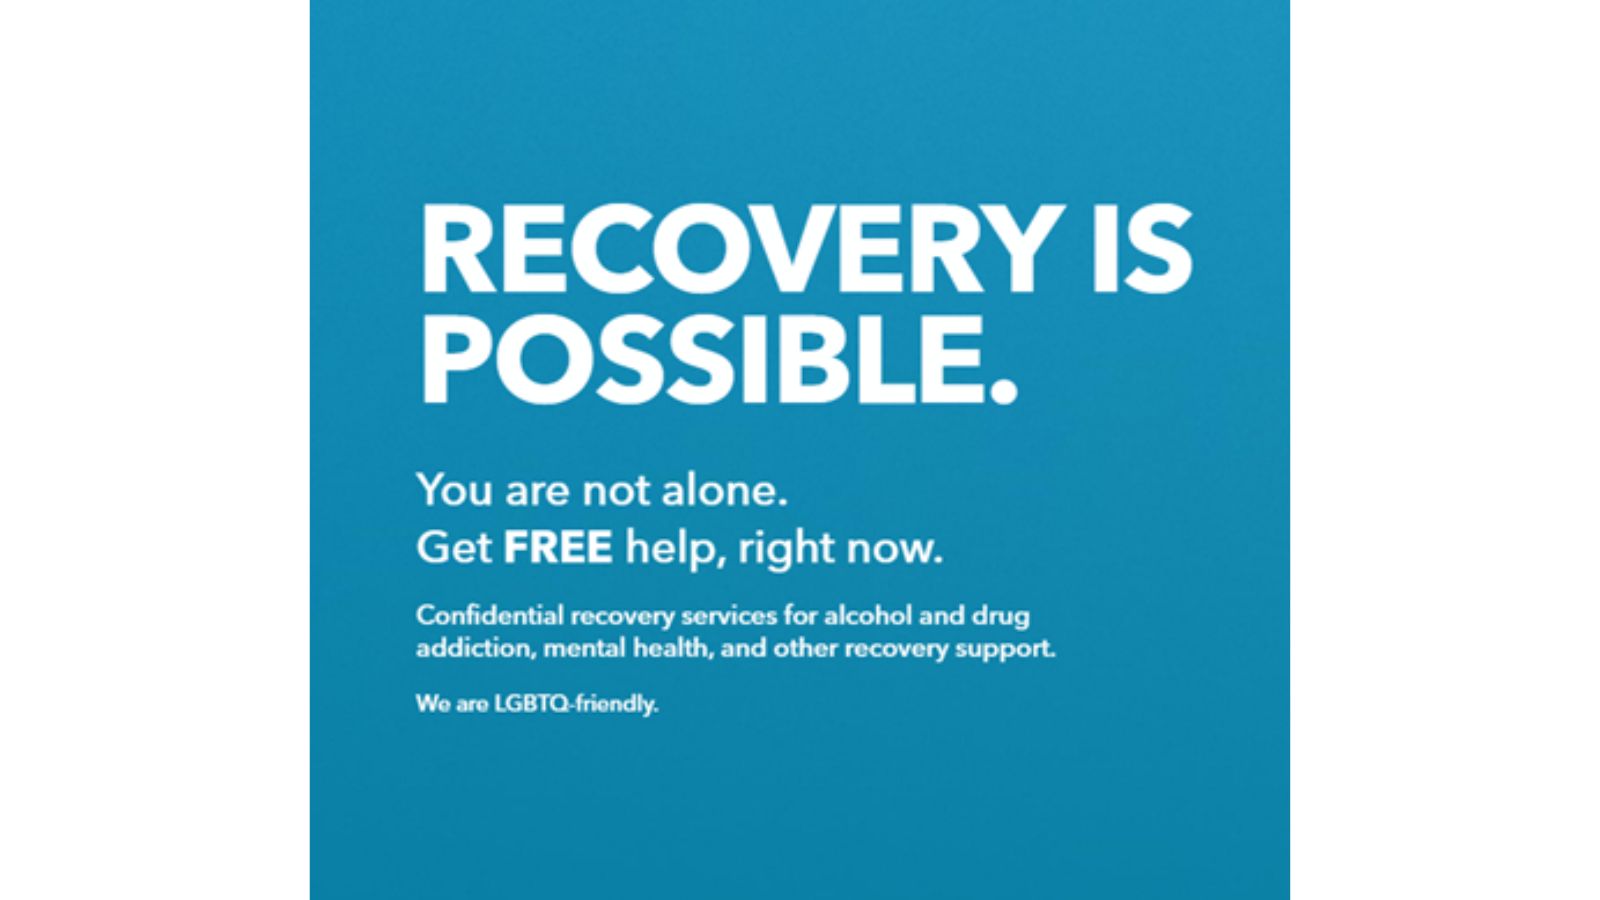 Recovery is possible slogan for RecoveryTexas